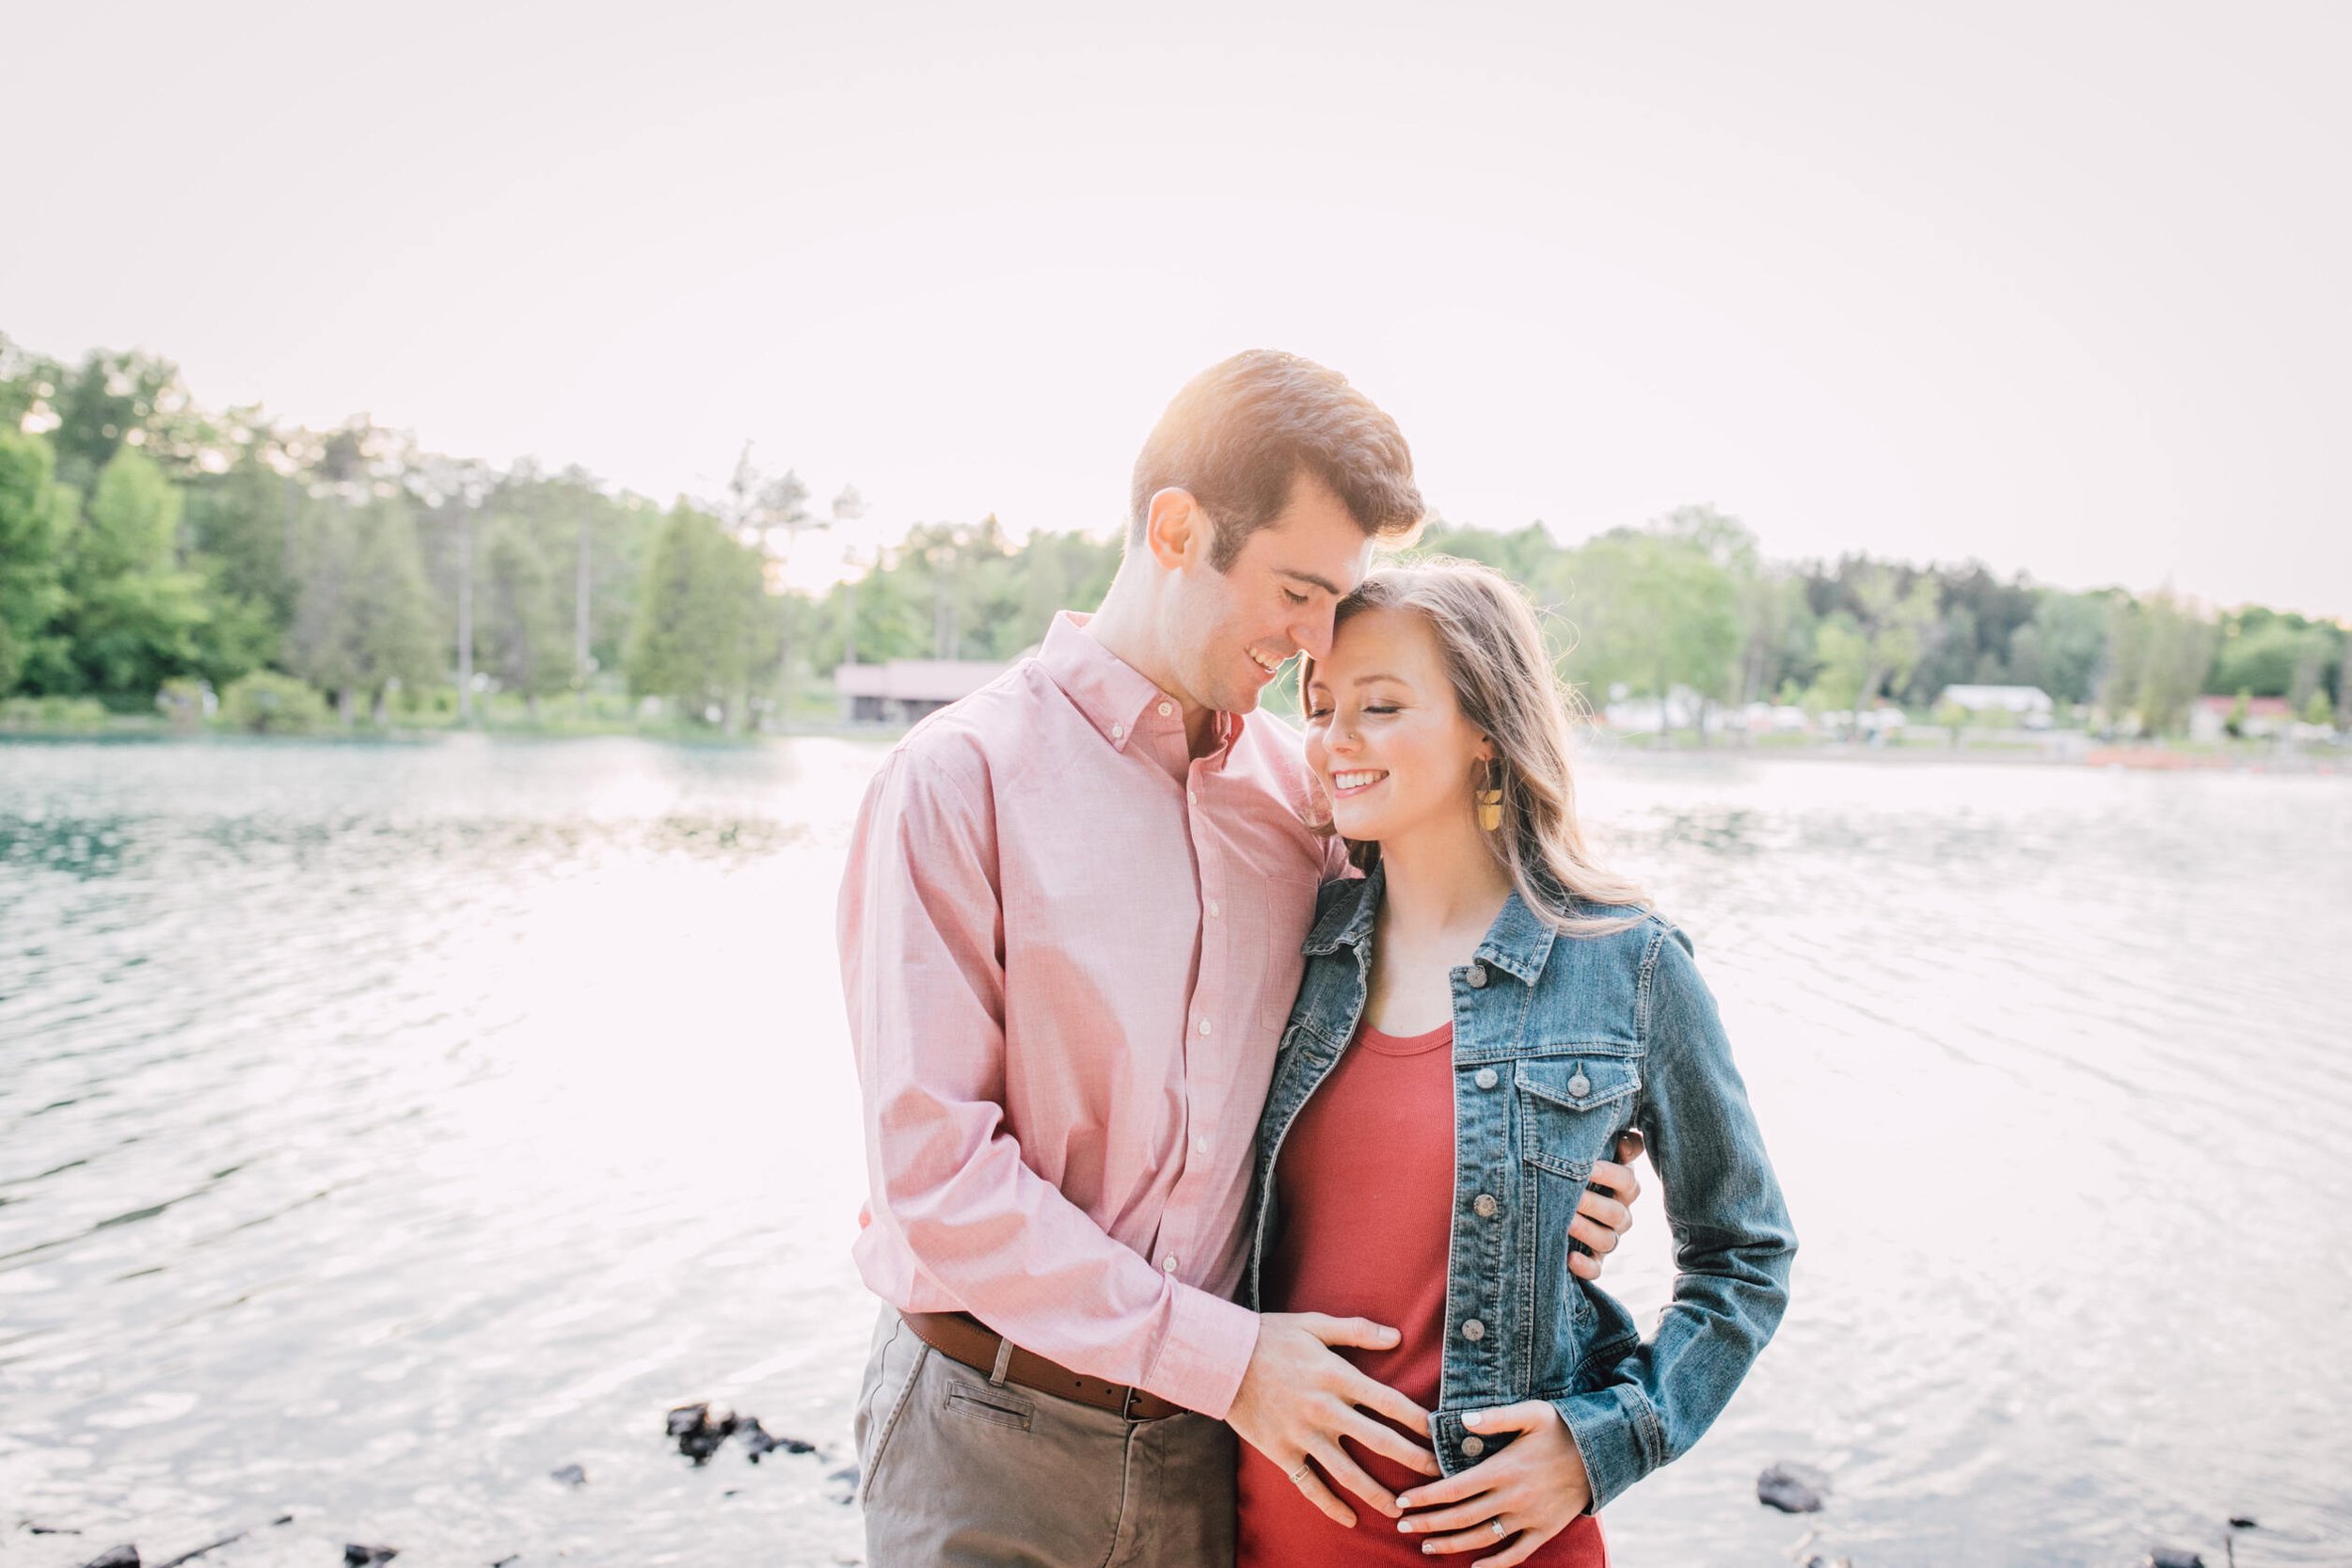  Parents to be smile together during pregnancy announcement photos 